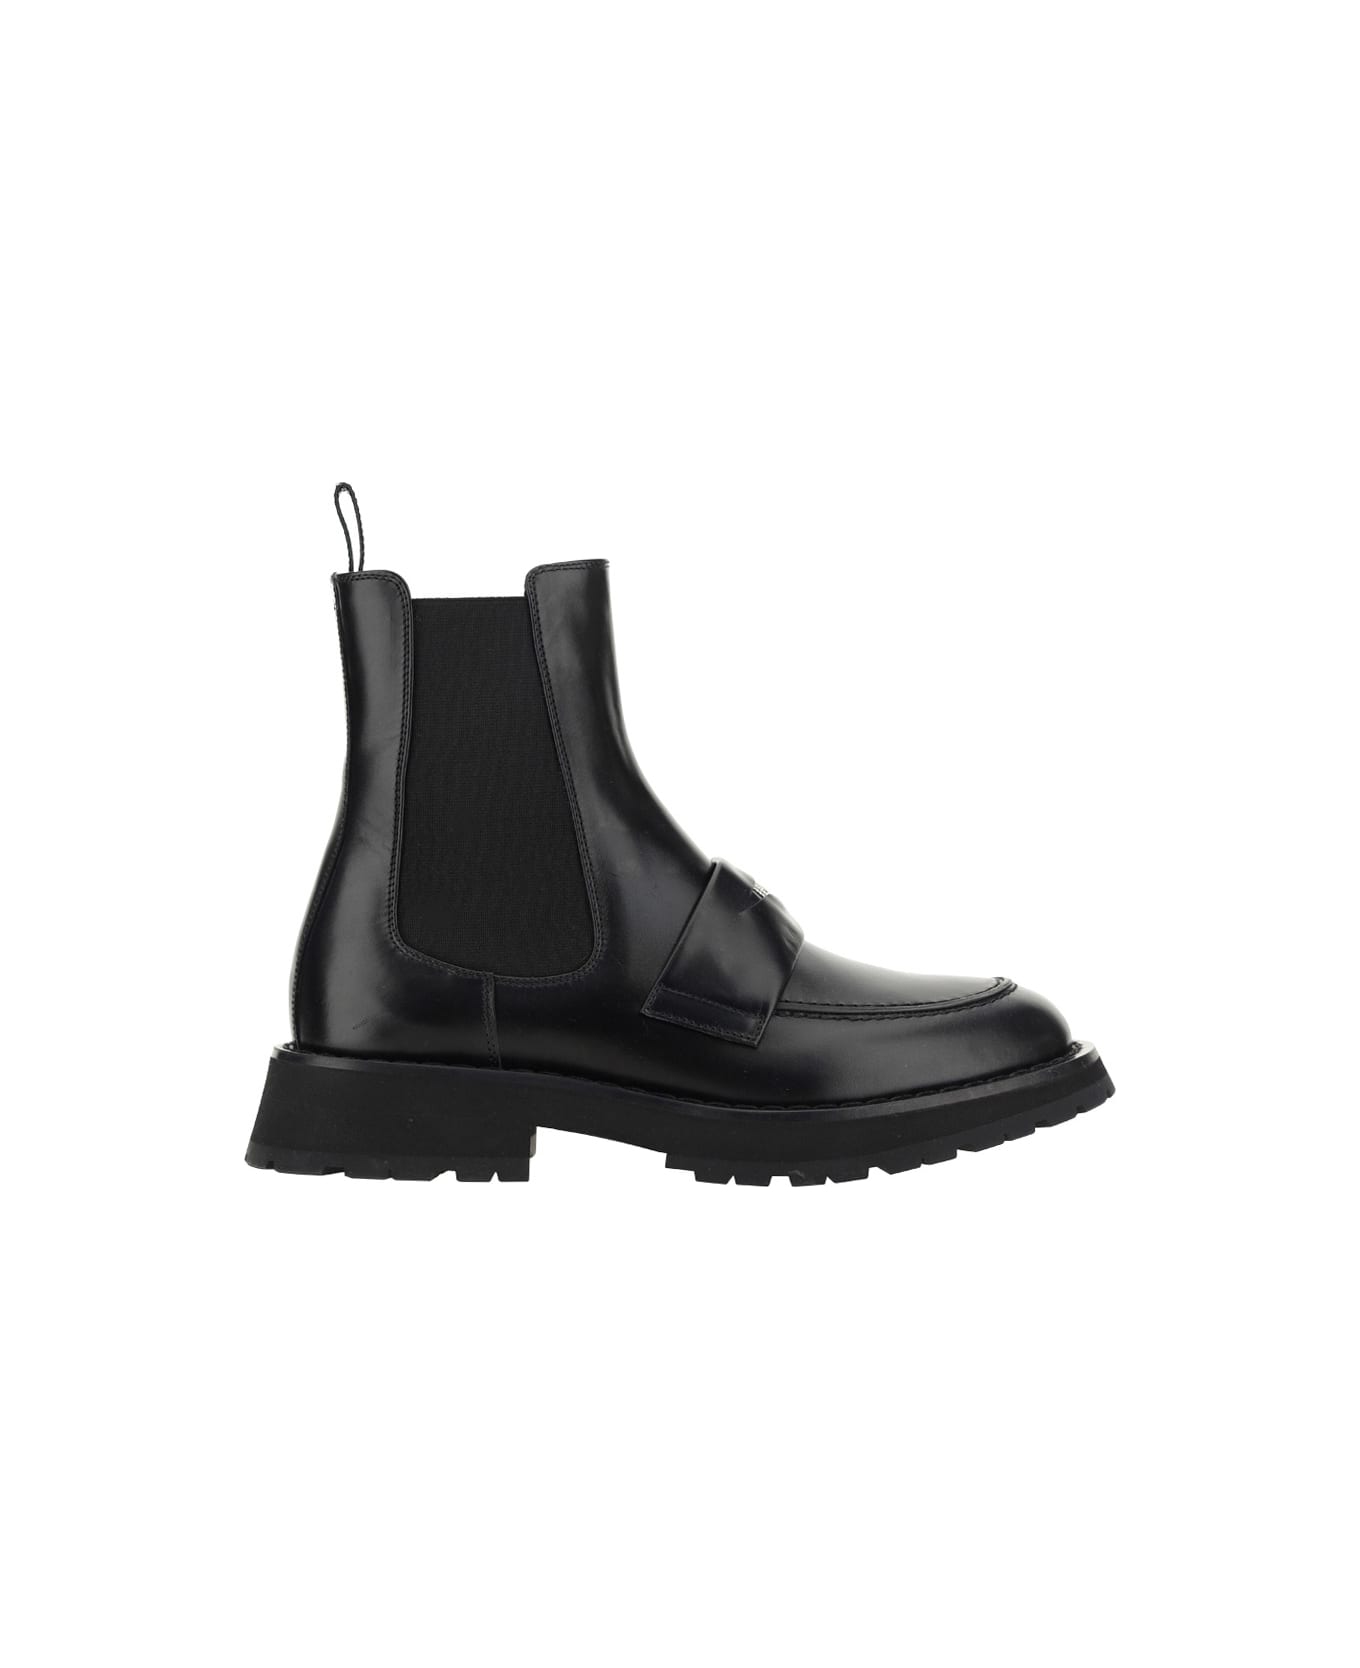 Alexander McQueen Ankle Boots - Black/black/silver